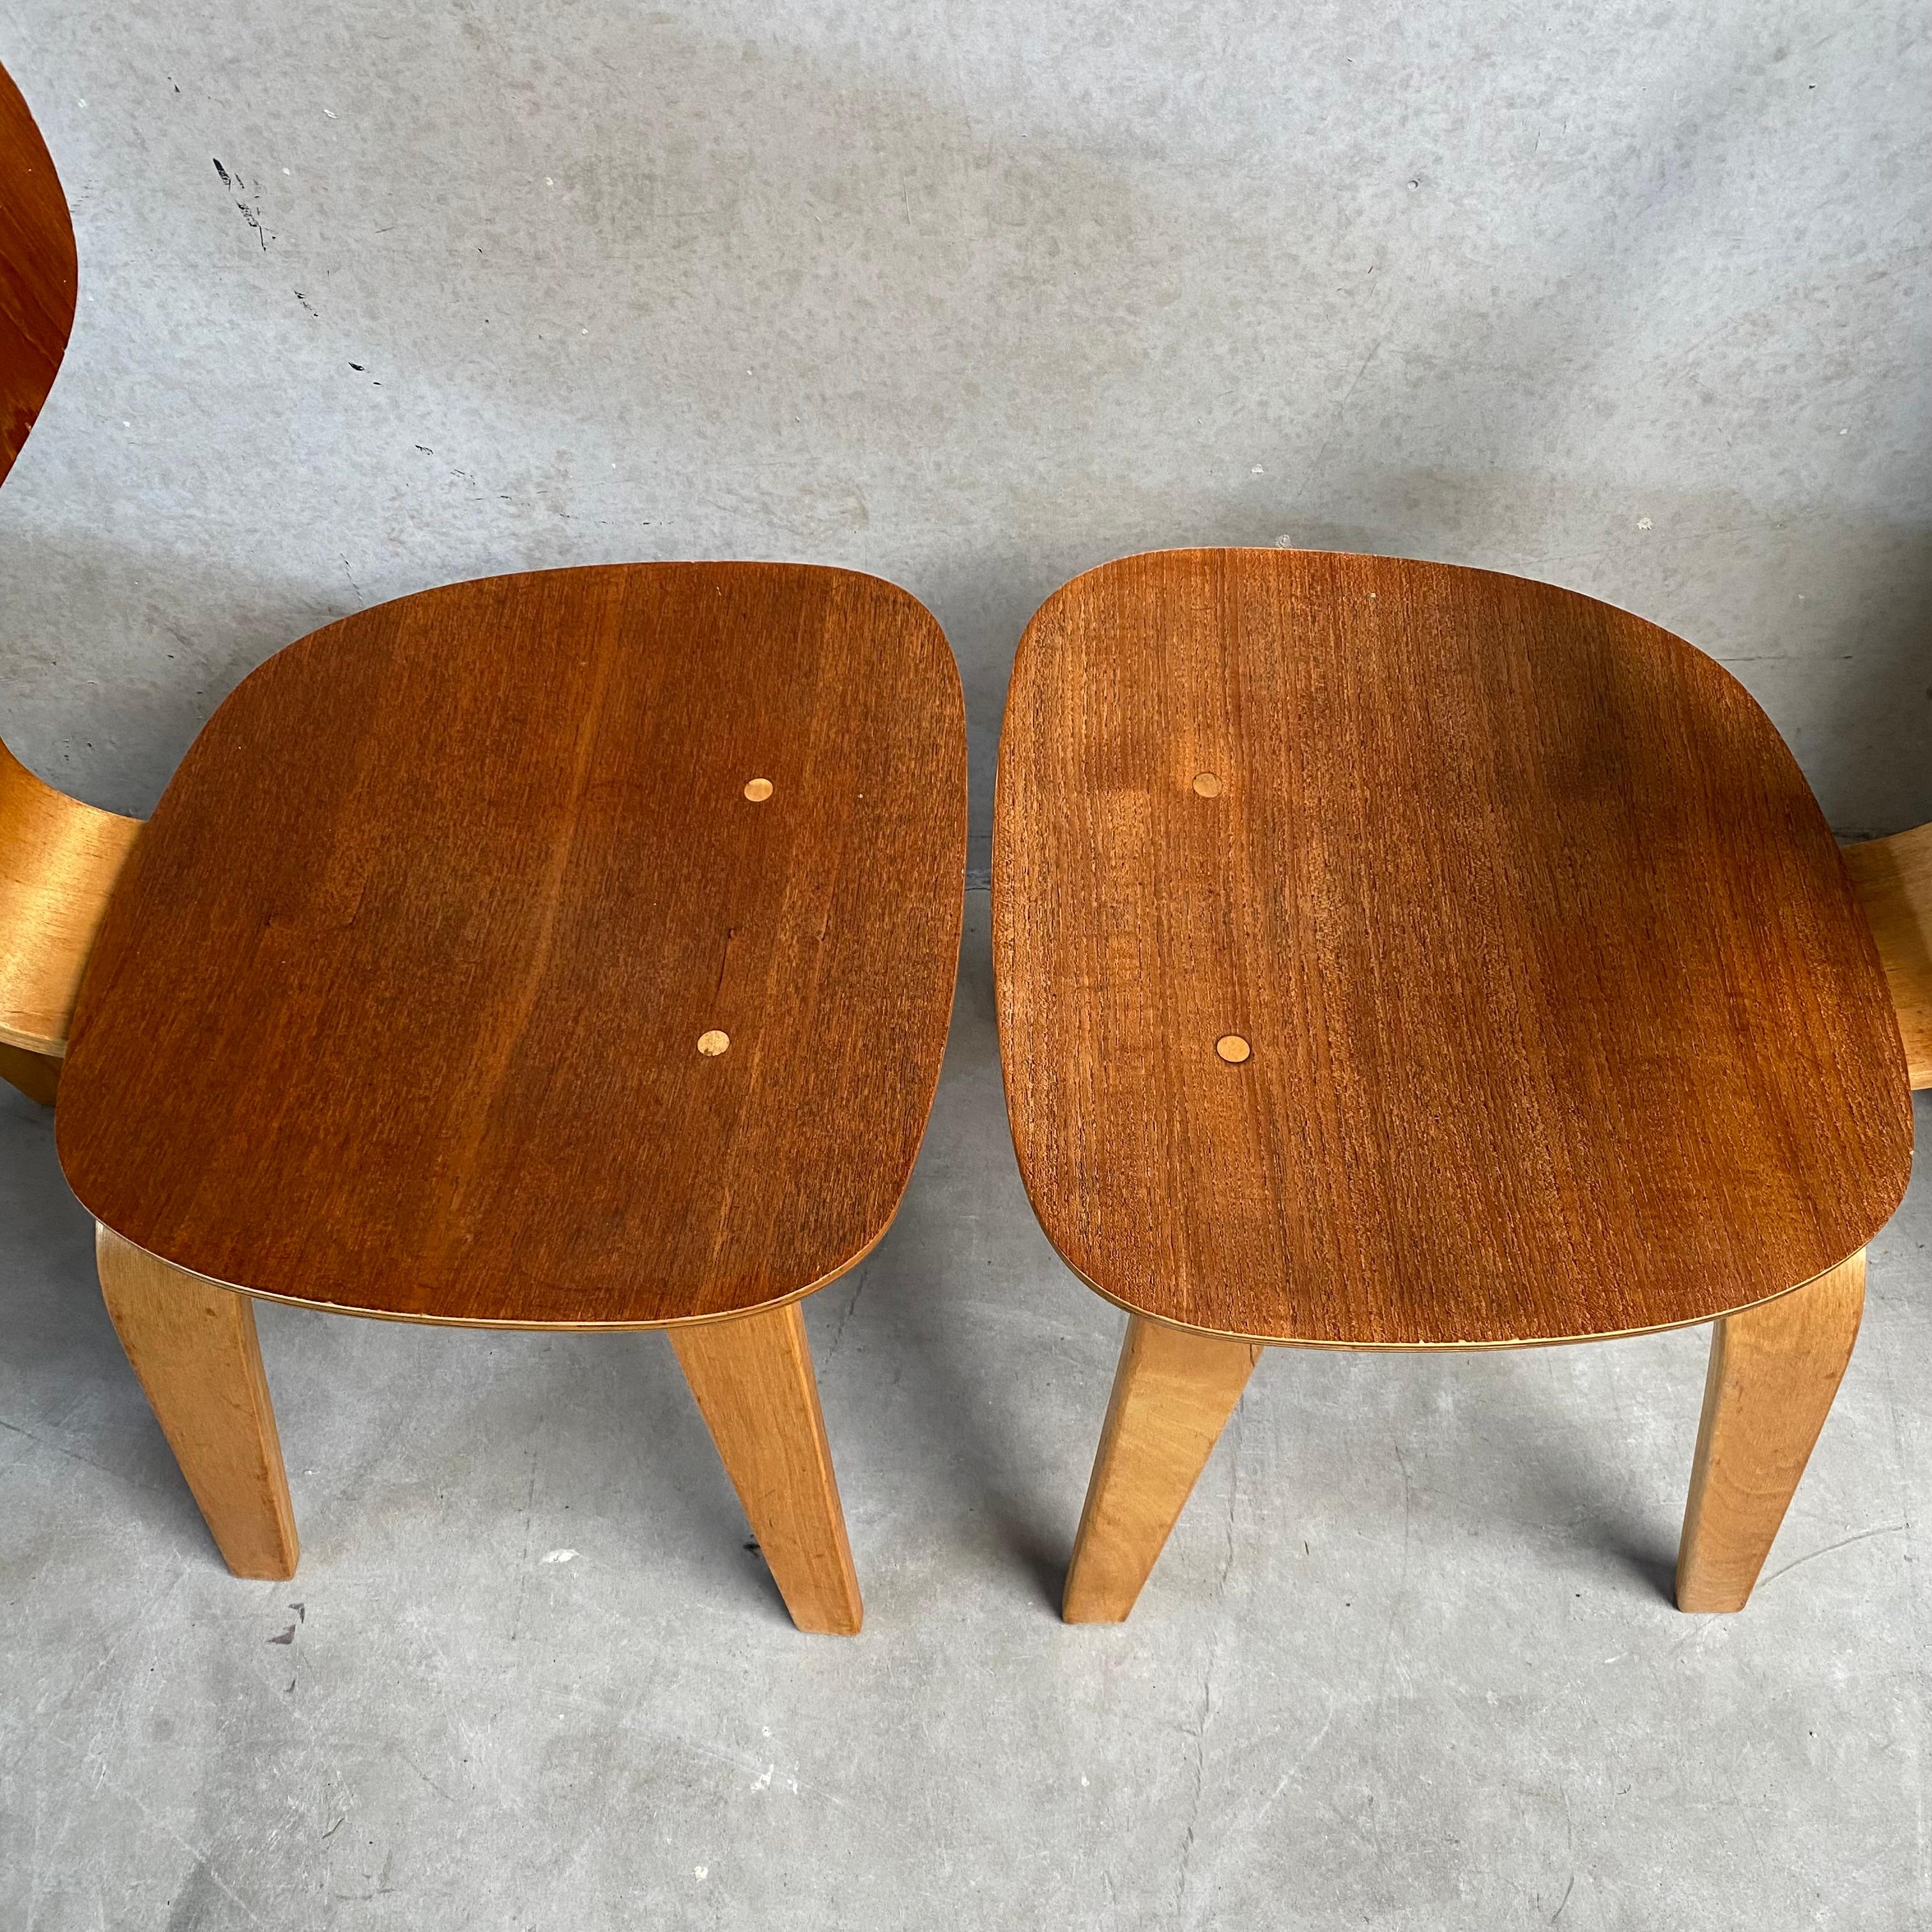 4 x Pastoe SB02 Dining Chairs by Cees Braakman Netherlands 1950 For Sale 3